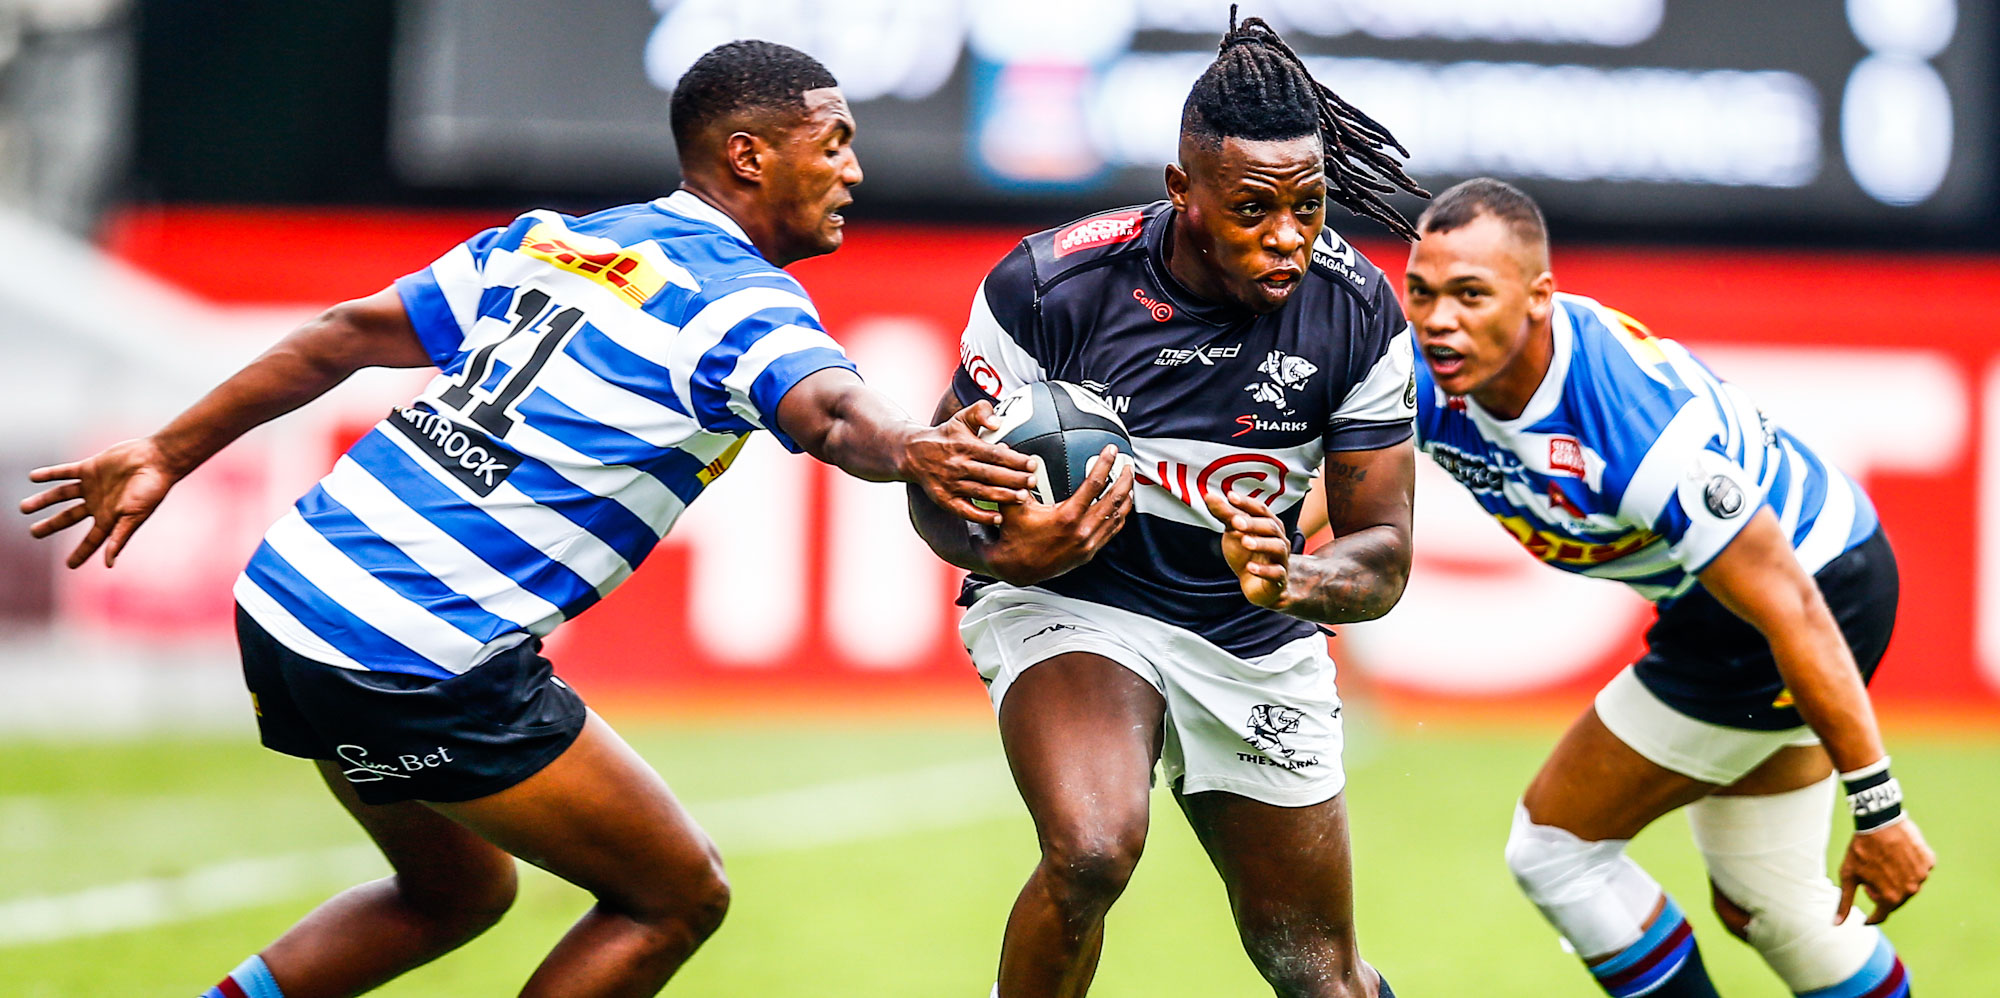 The Cell C Sharks beat DHL WP by 20-7 the last time they met, in the third round in Durban.